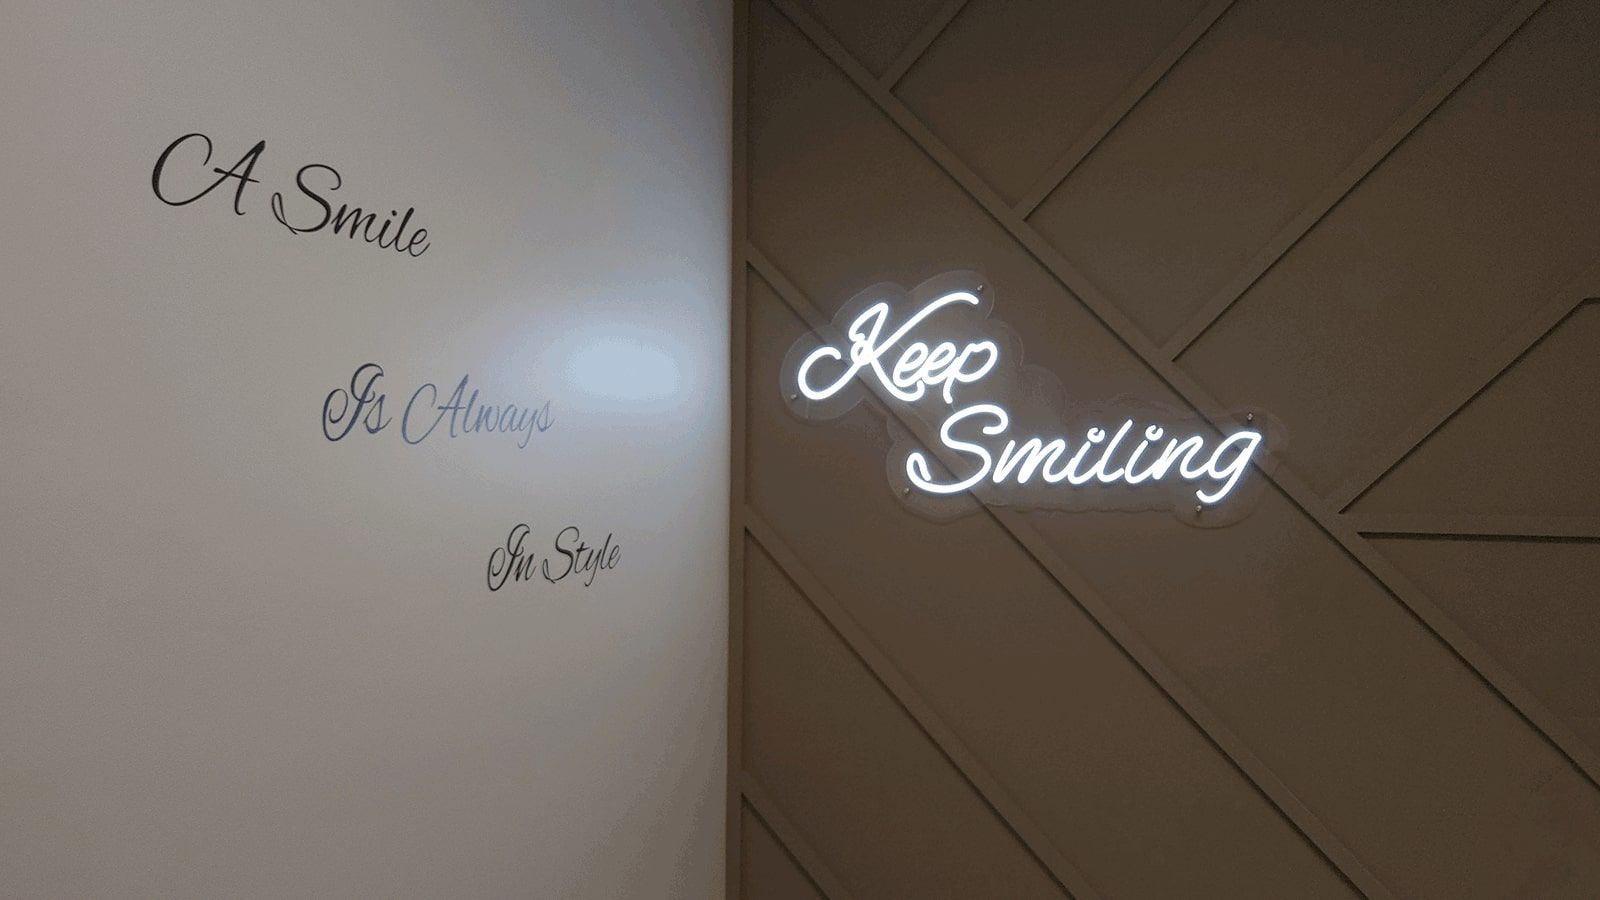 Viva Smile light up sign mounted on the wall